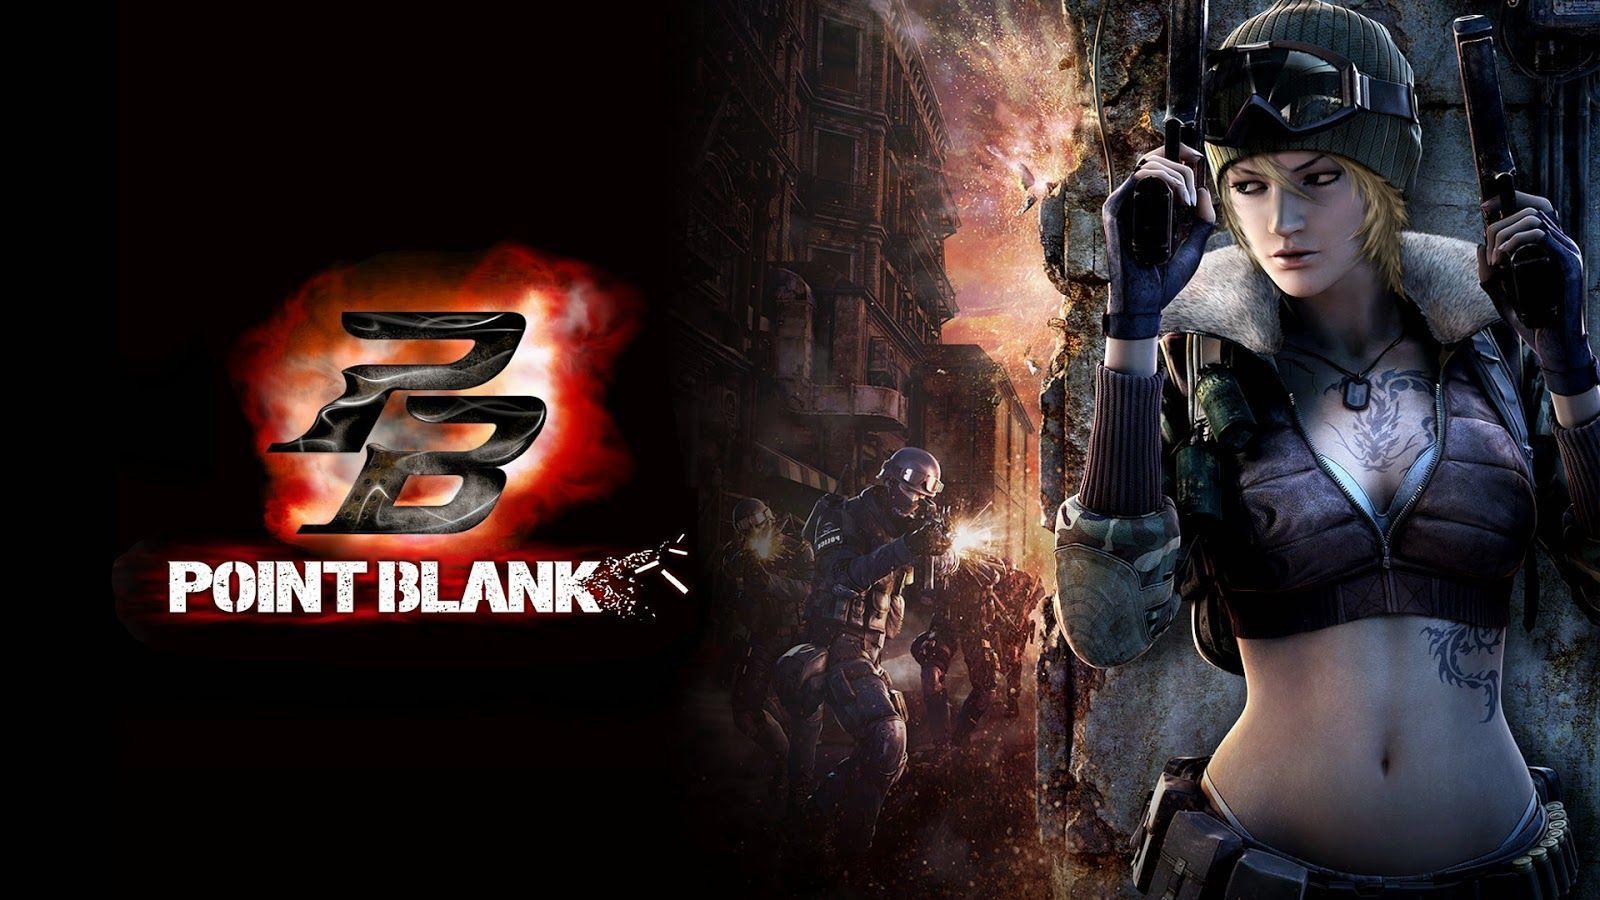 Point Blank HD Wallpaper Wallpaper Background of Your Choice